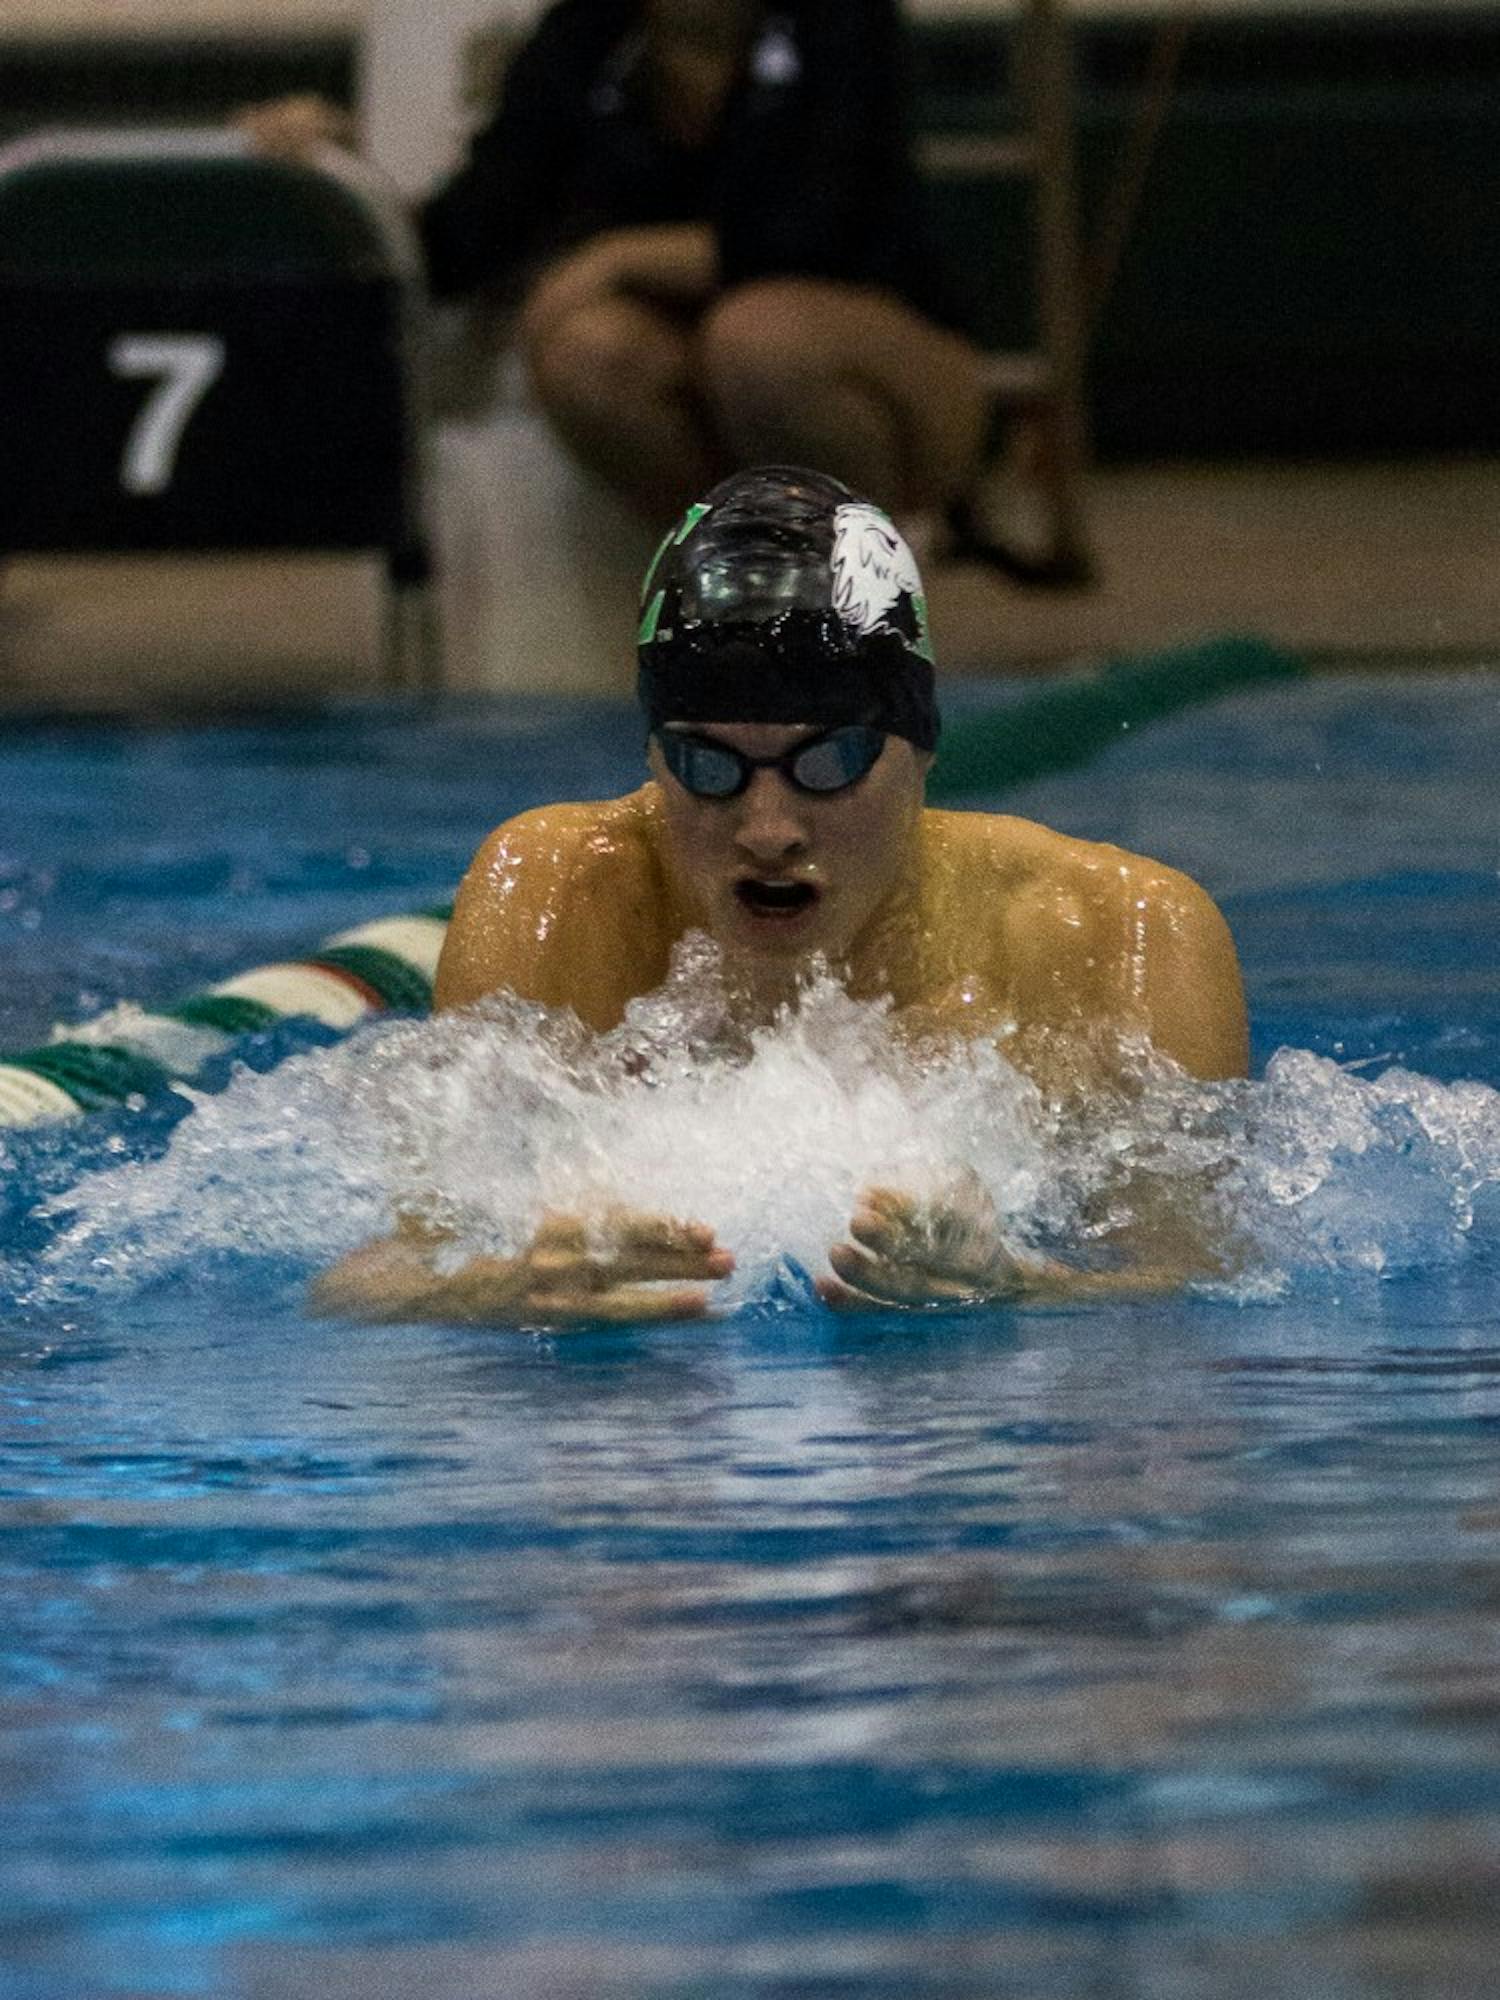 Junior Mike Fisher (Saline, MI) won the 200 yard breaststroke (2:04.75) by 1.5 seconds.